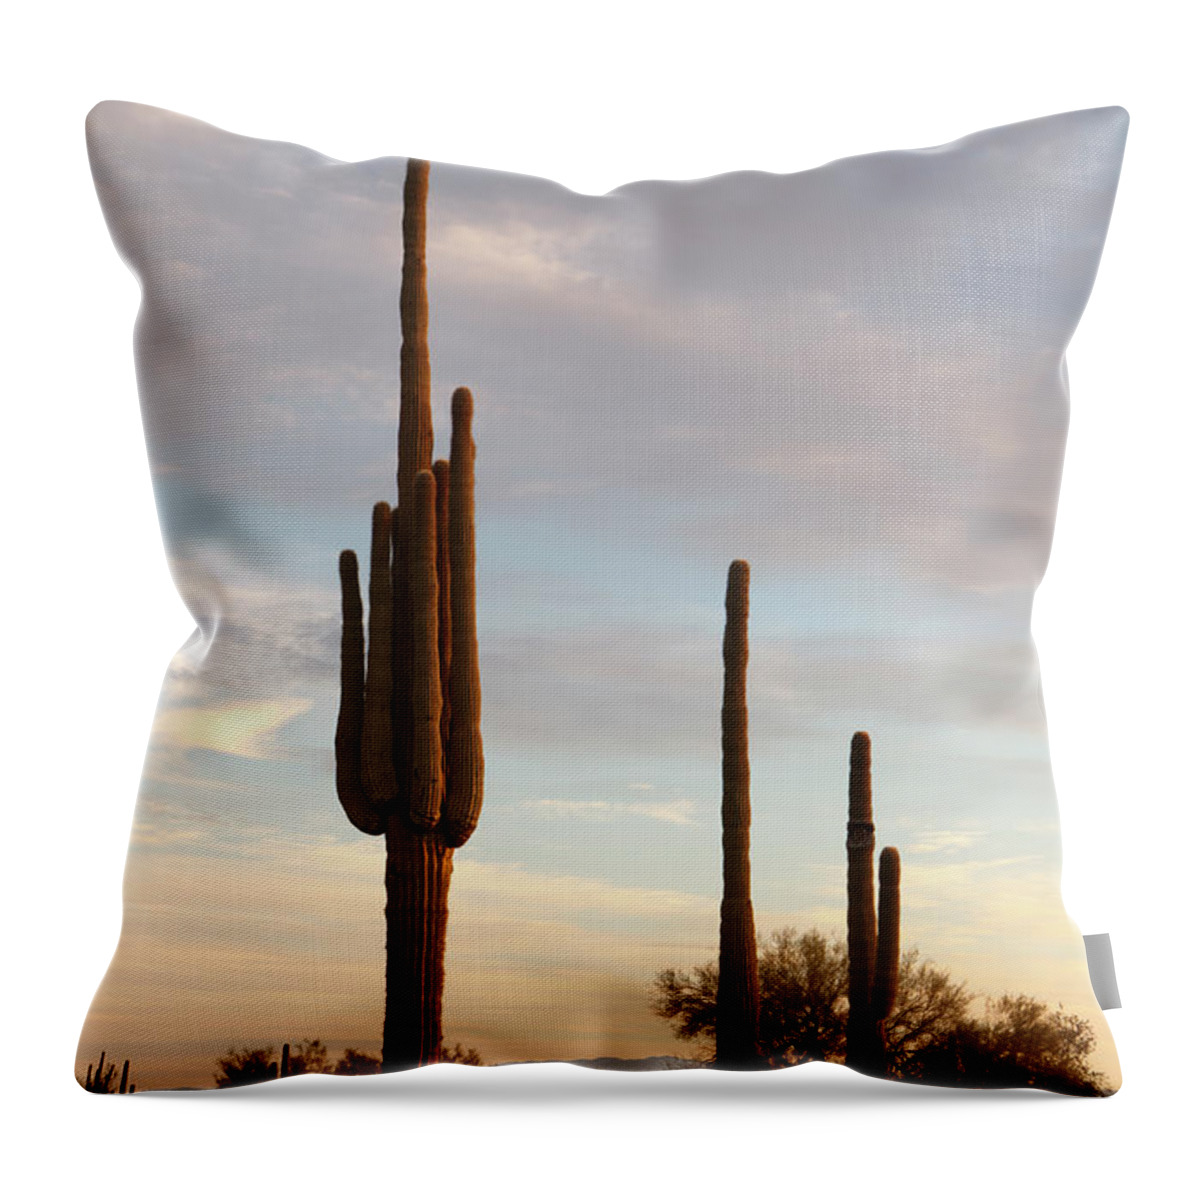 Saguaro Cactus Throw Pillow featuring the photograph Giant Saguaros by Dustypixel